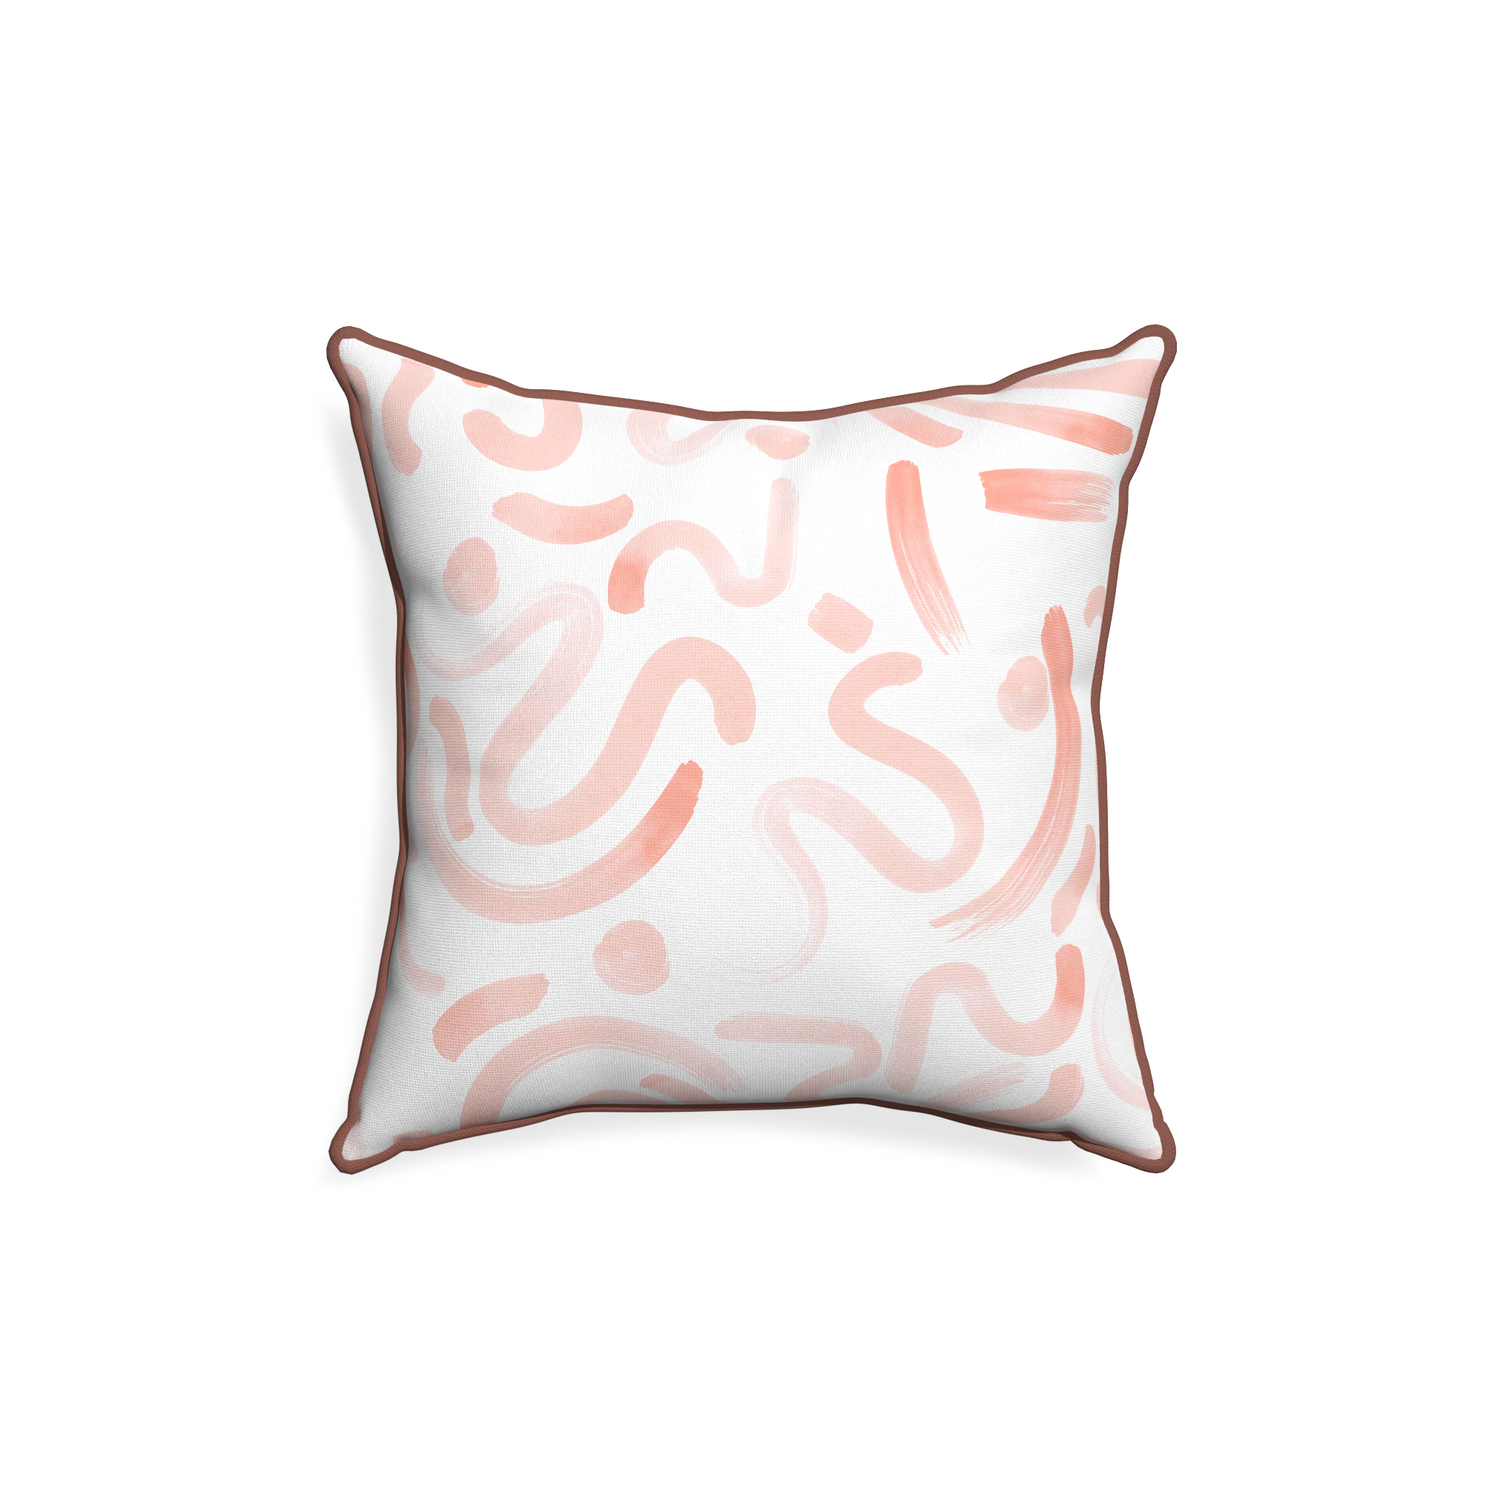 18-square hockney pink custom pink graphicpillow with w piping on white background